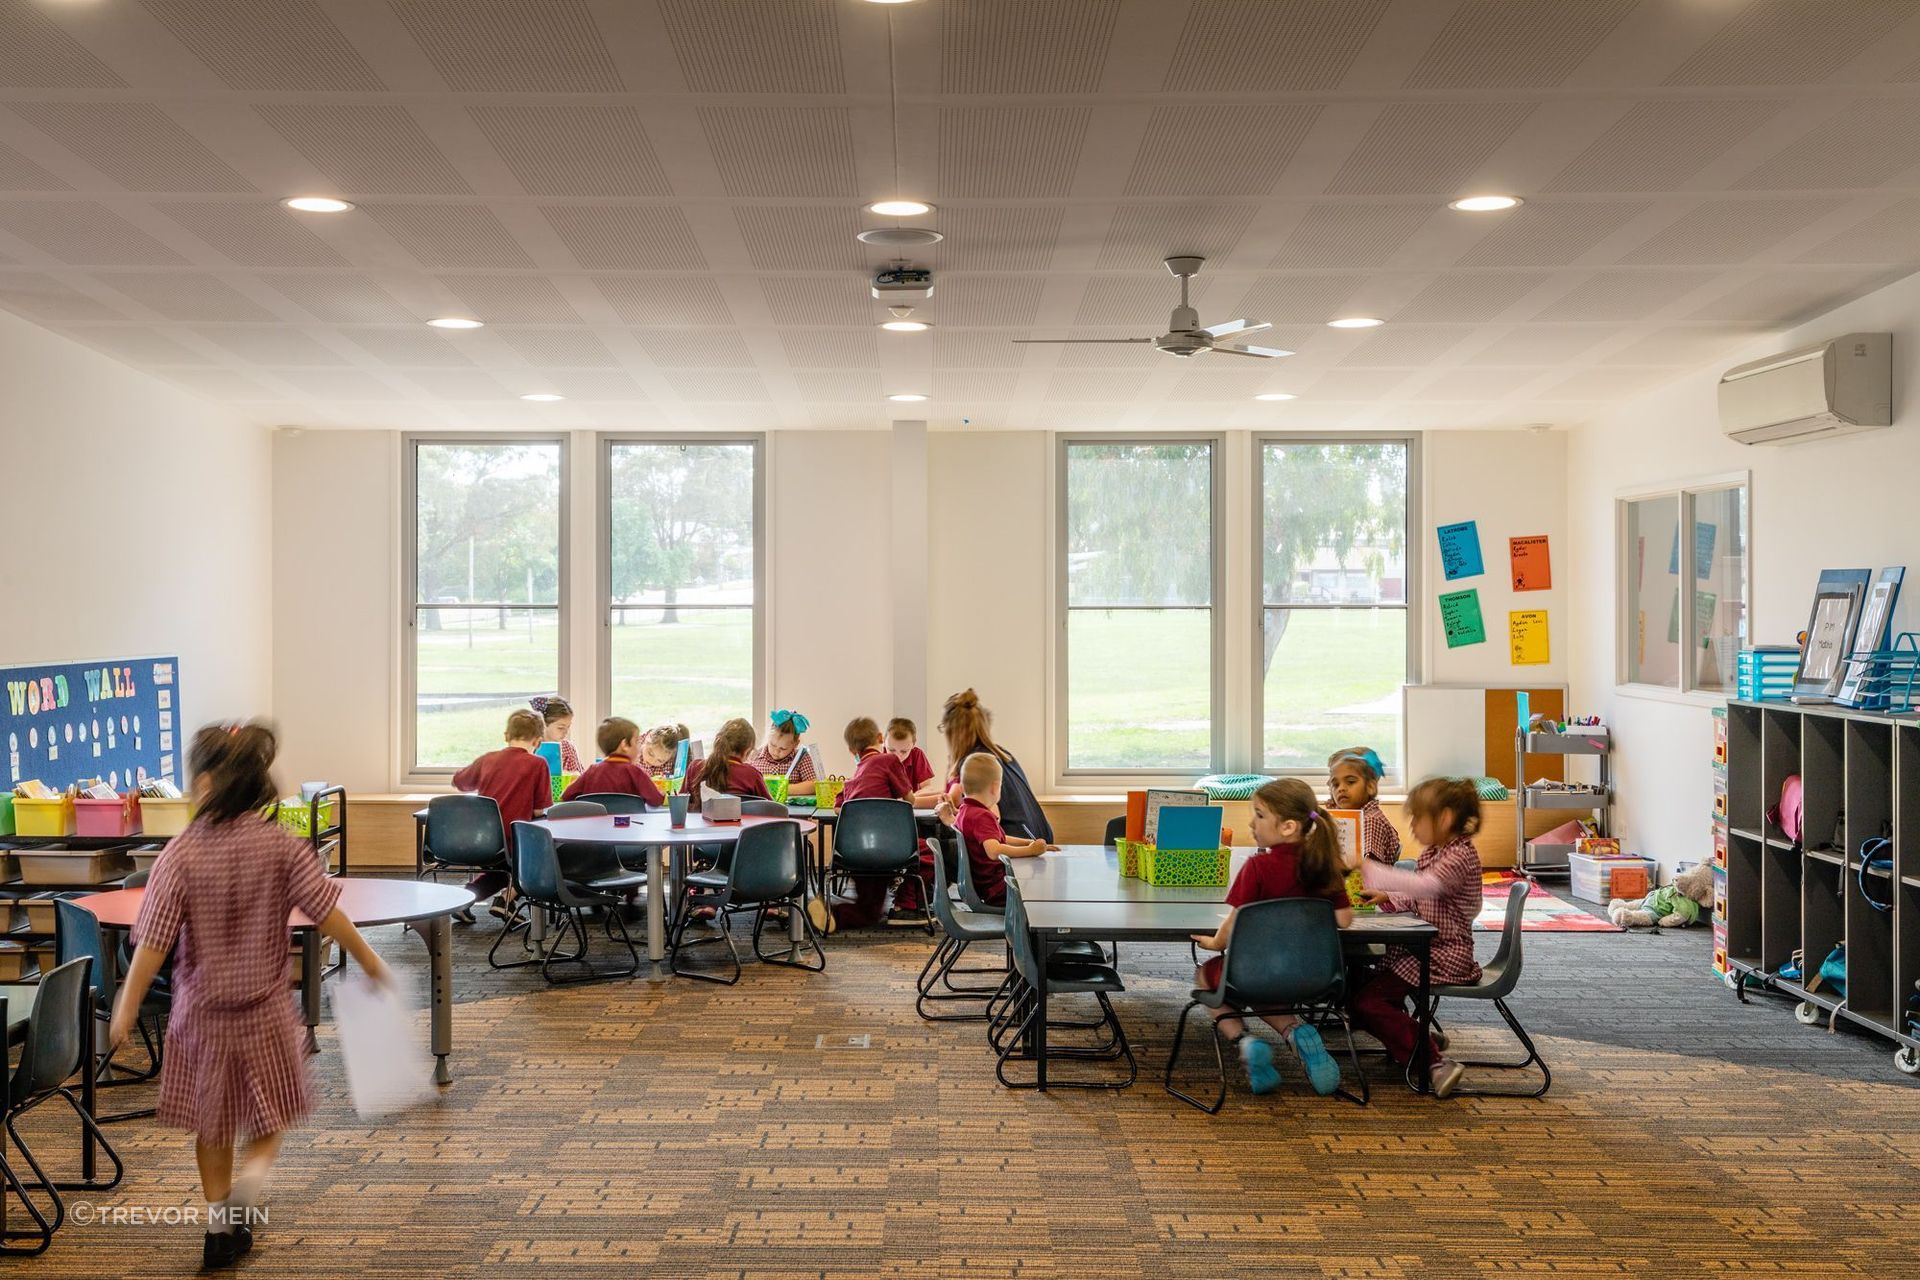 Students in the renovated classrooms.